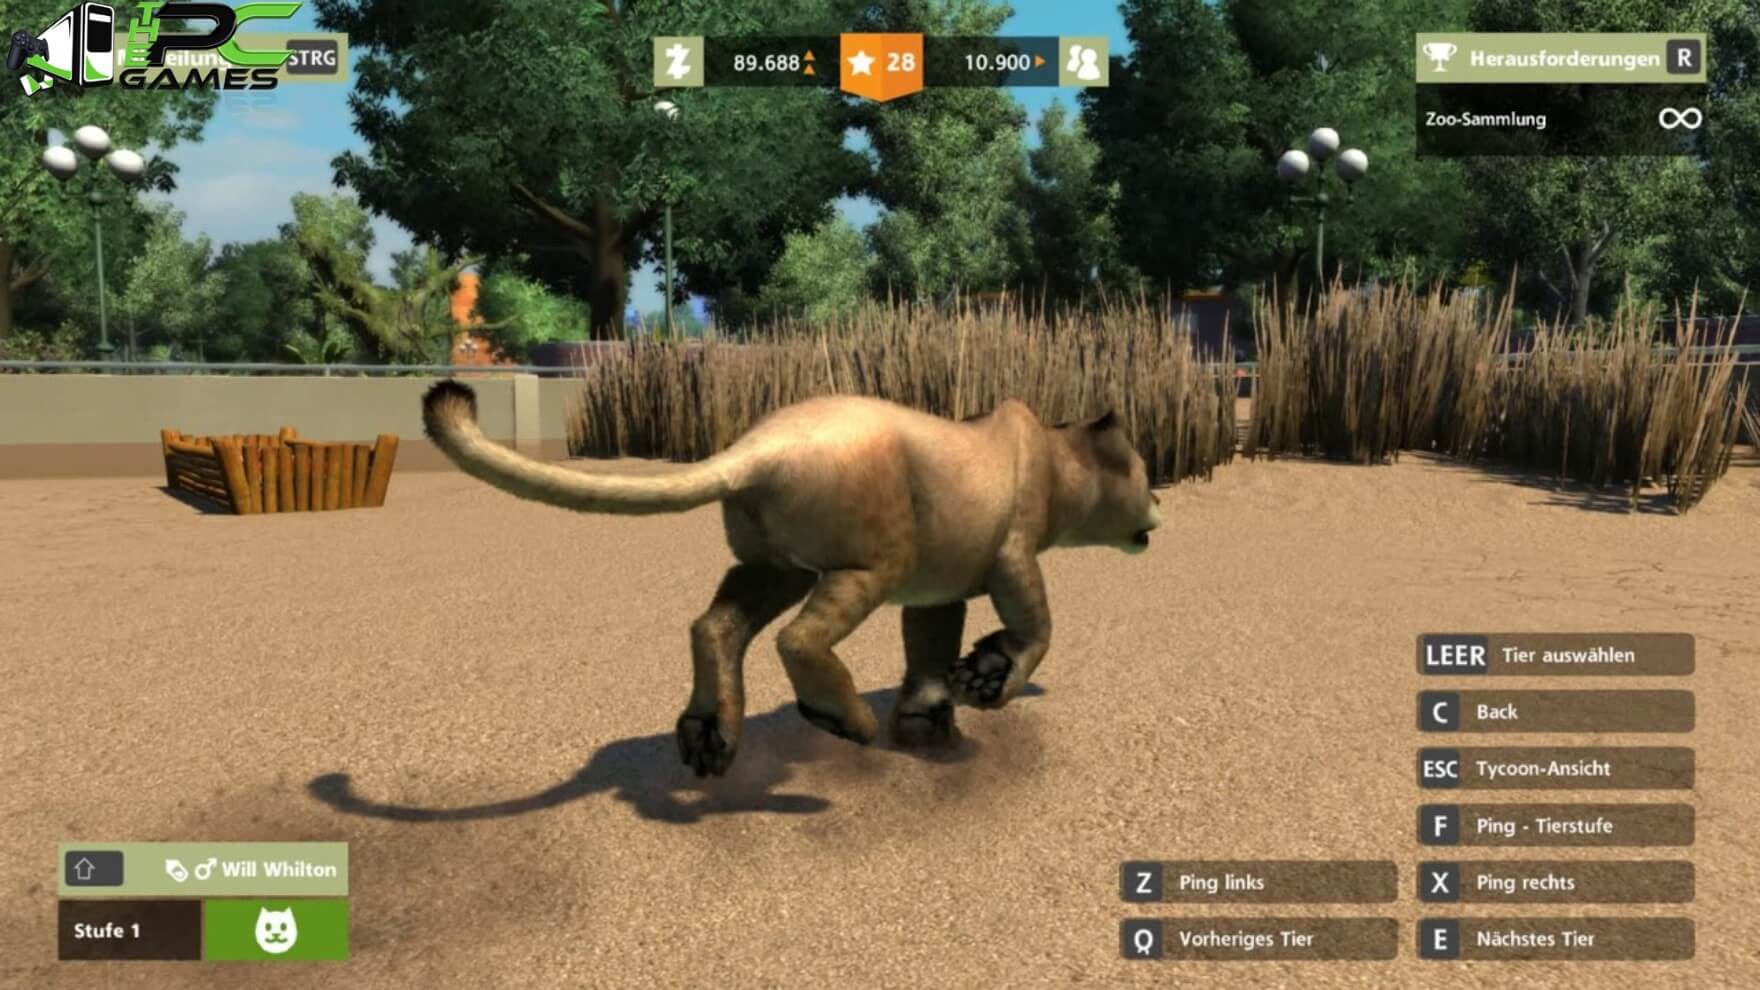 how to install zoo tycoon 2 mods